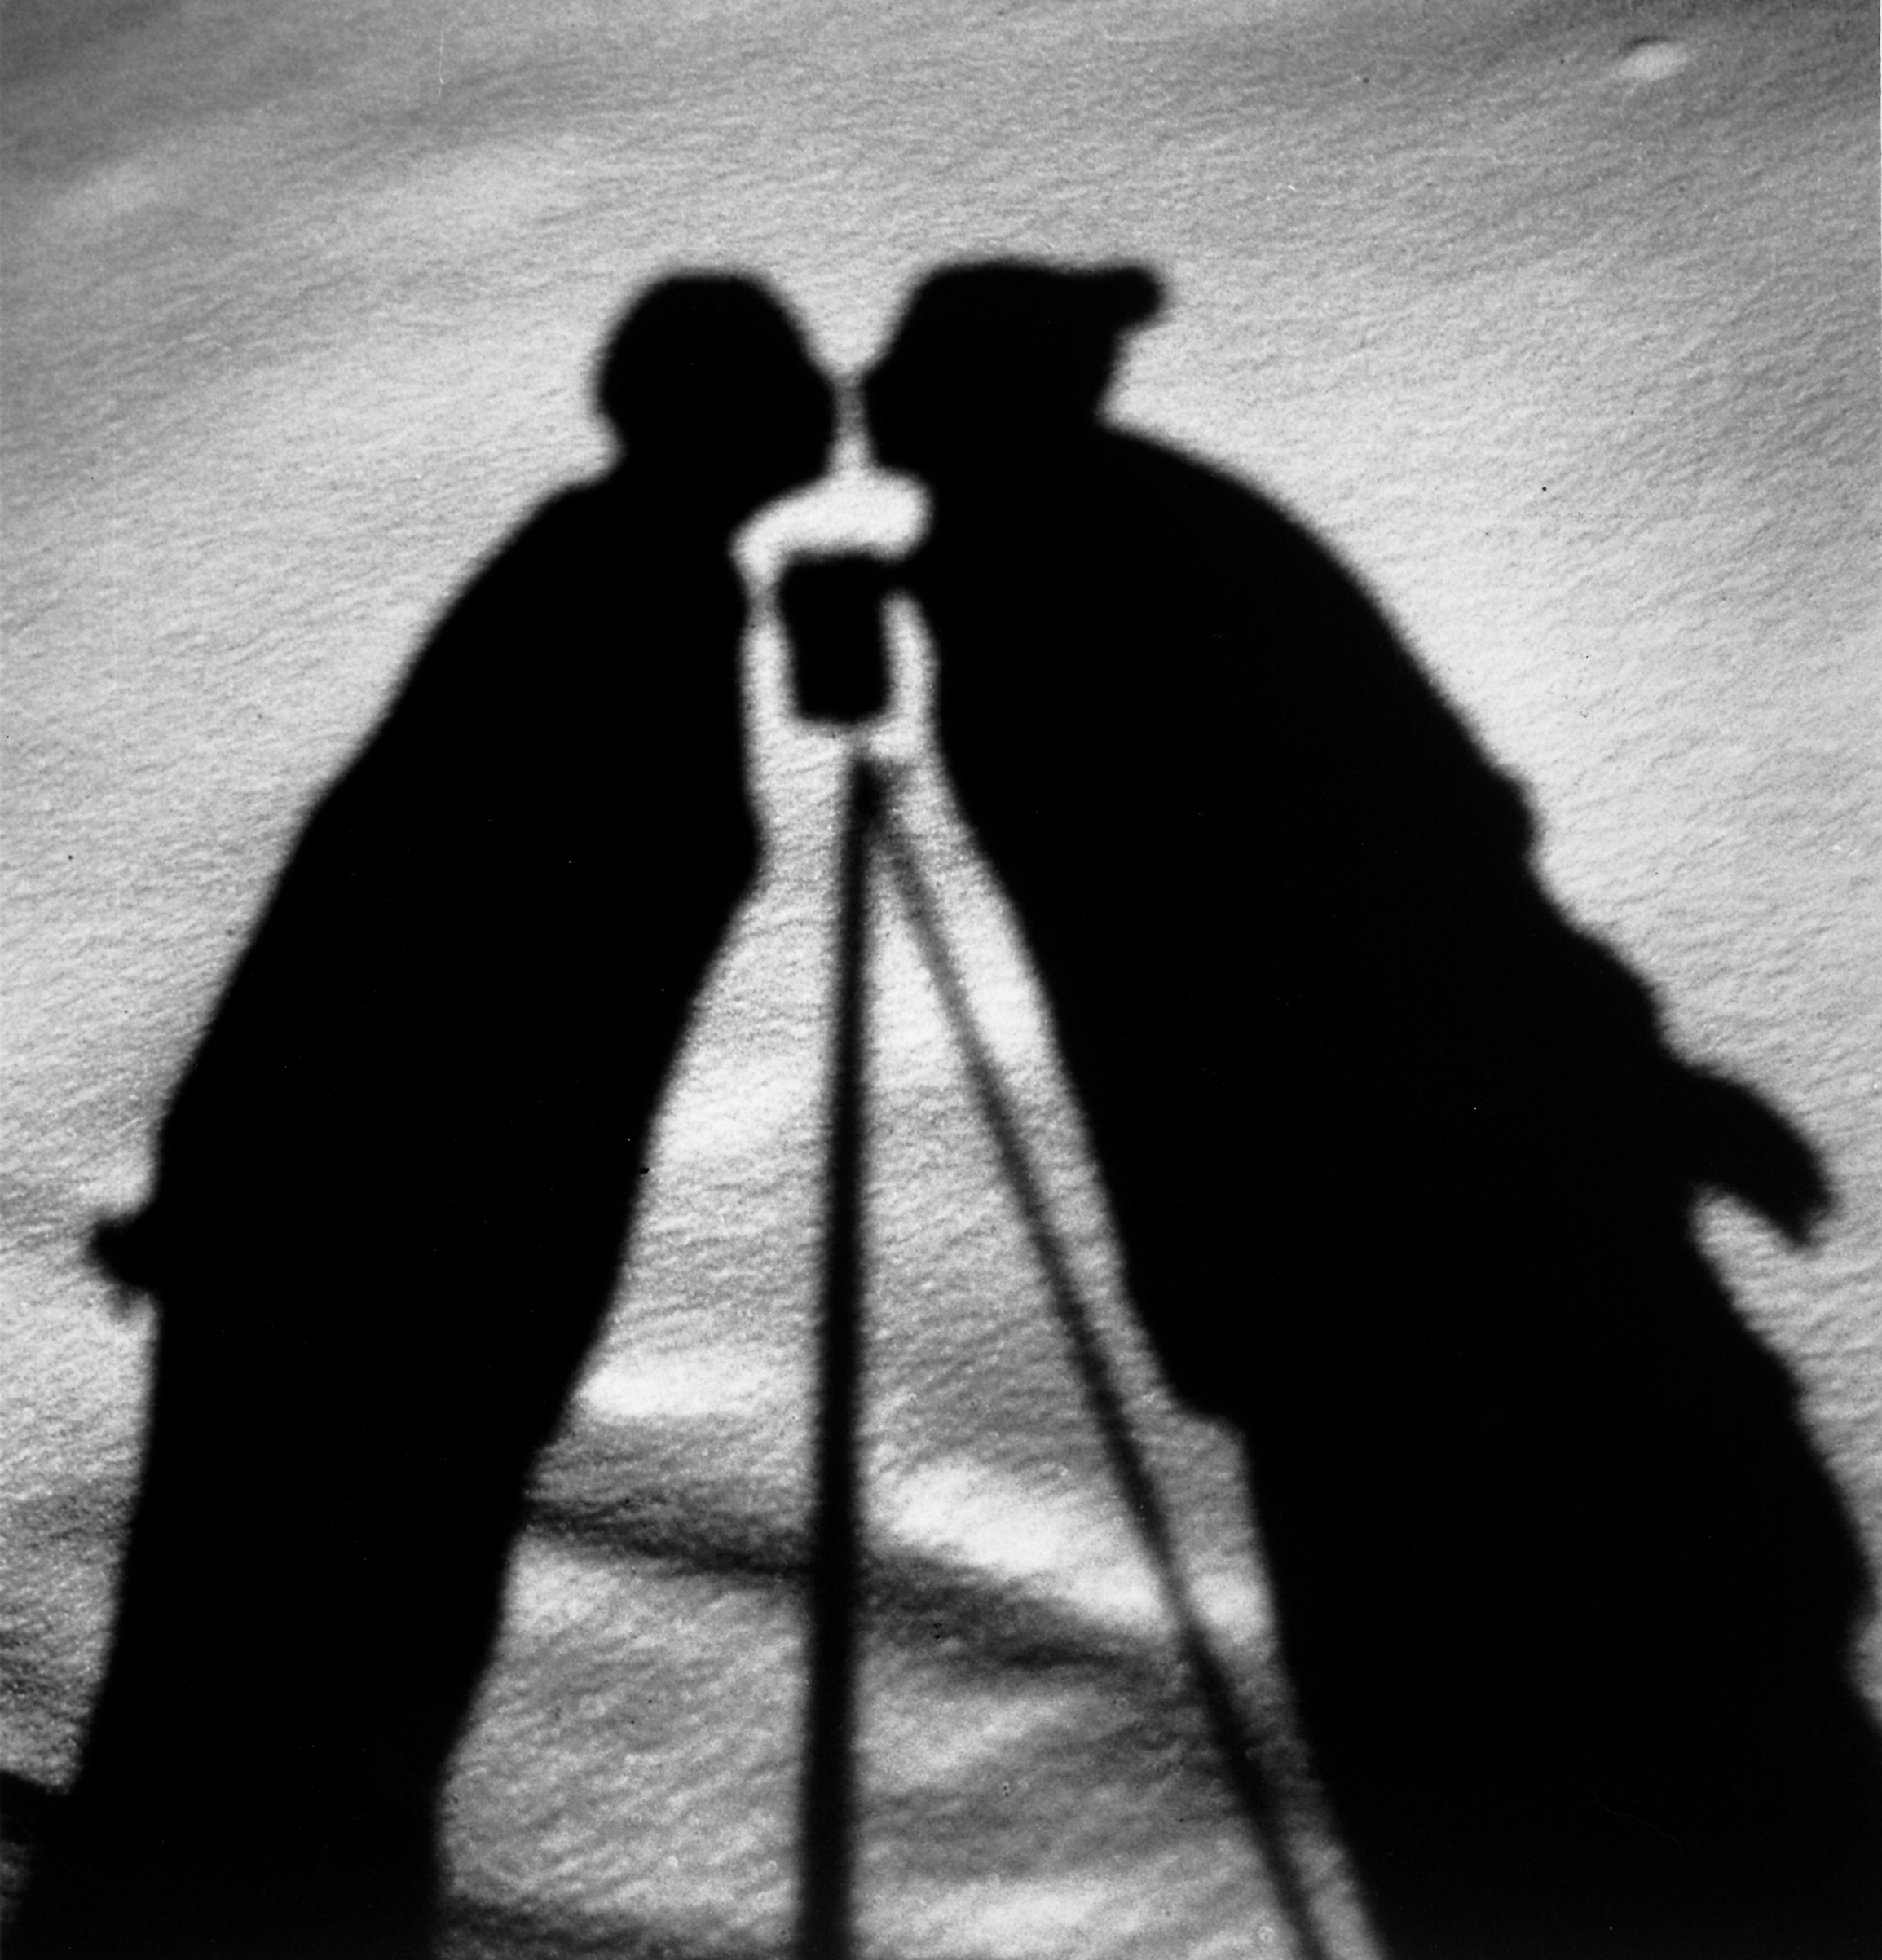 Shadows on the ground of kissing figures with camera on tripod between, 1930.